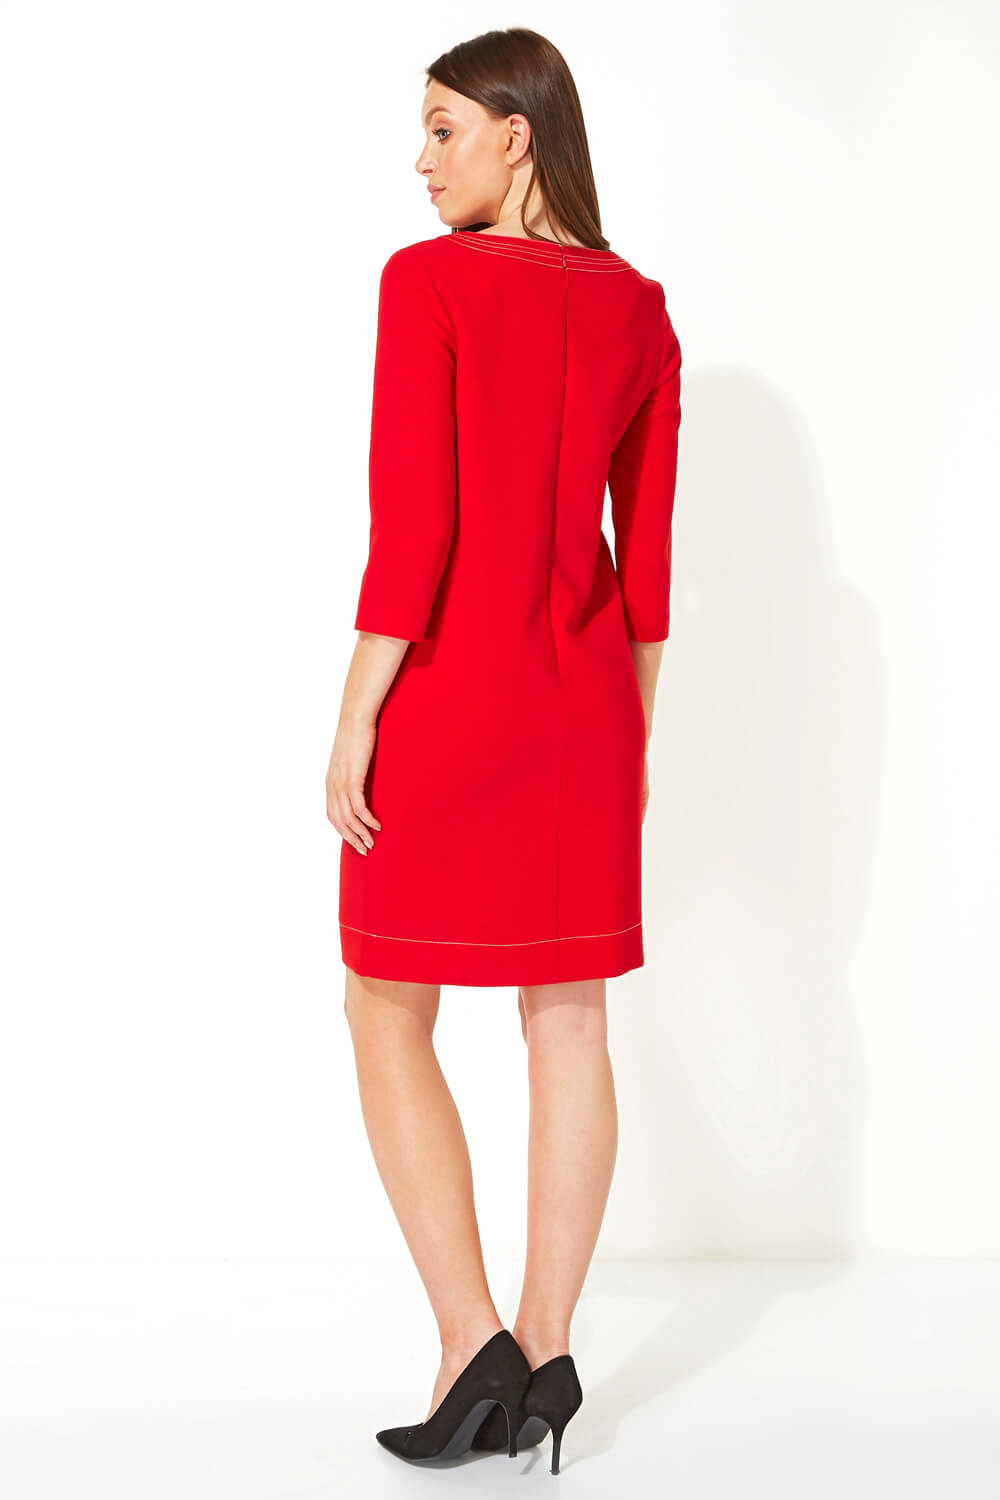 Red 3/4 Sleeve Top Stitch Shift Dress, Image 4 of 5